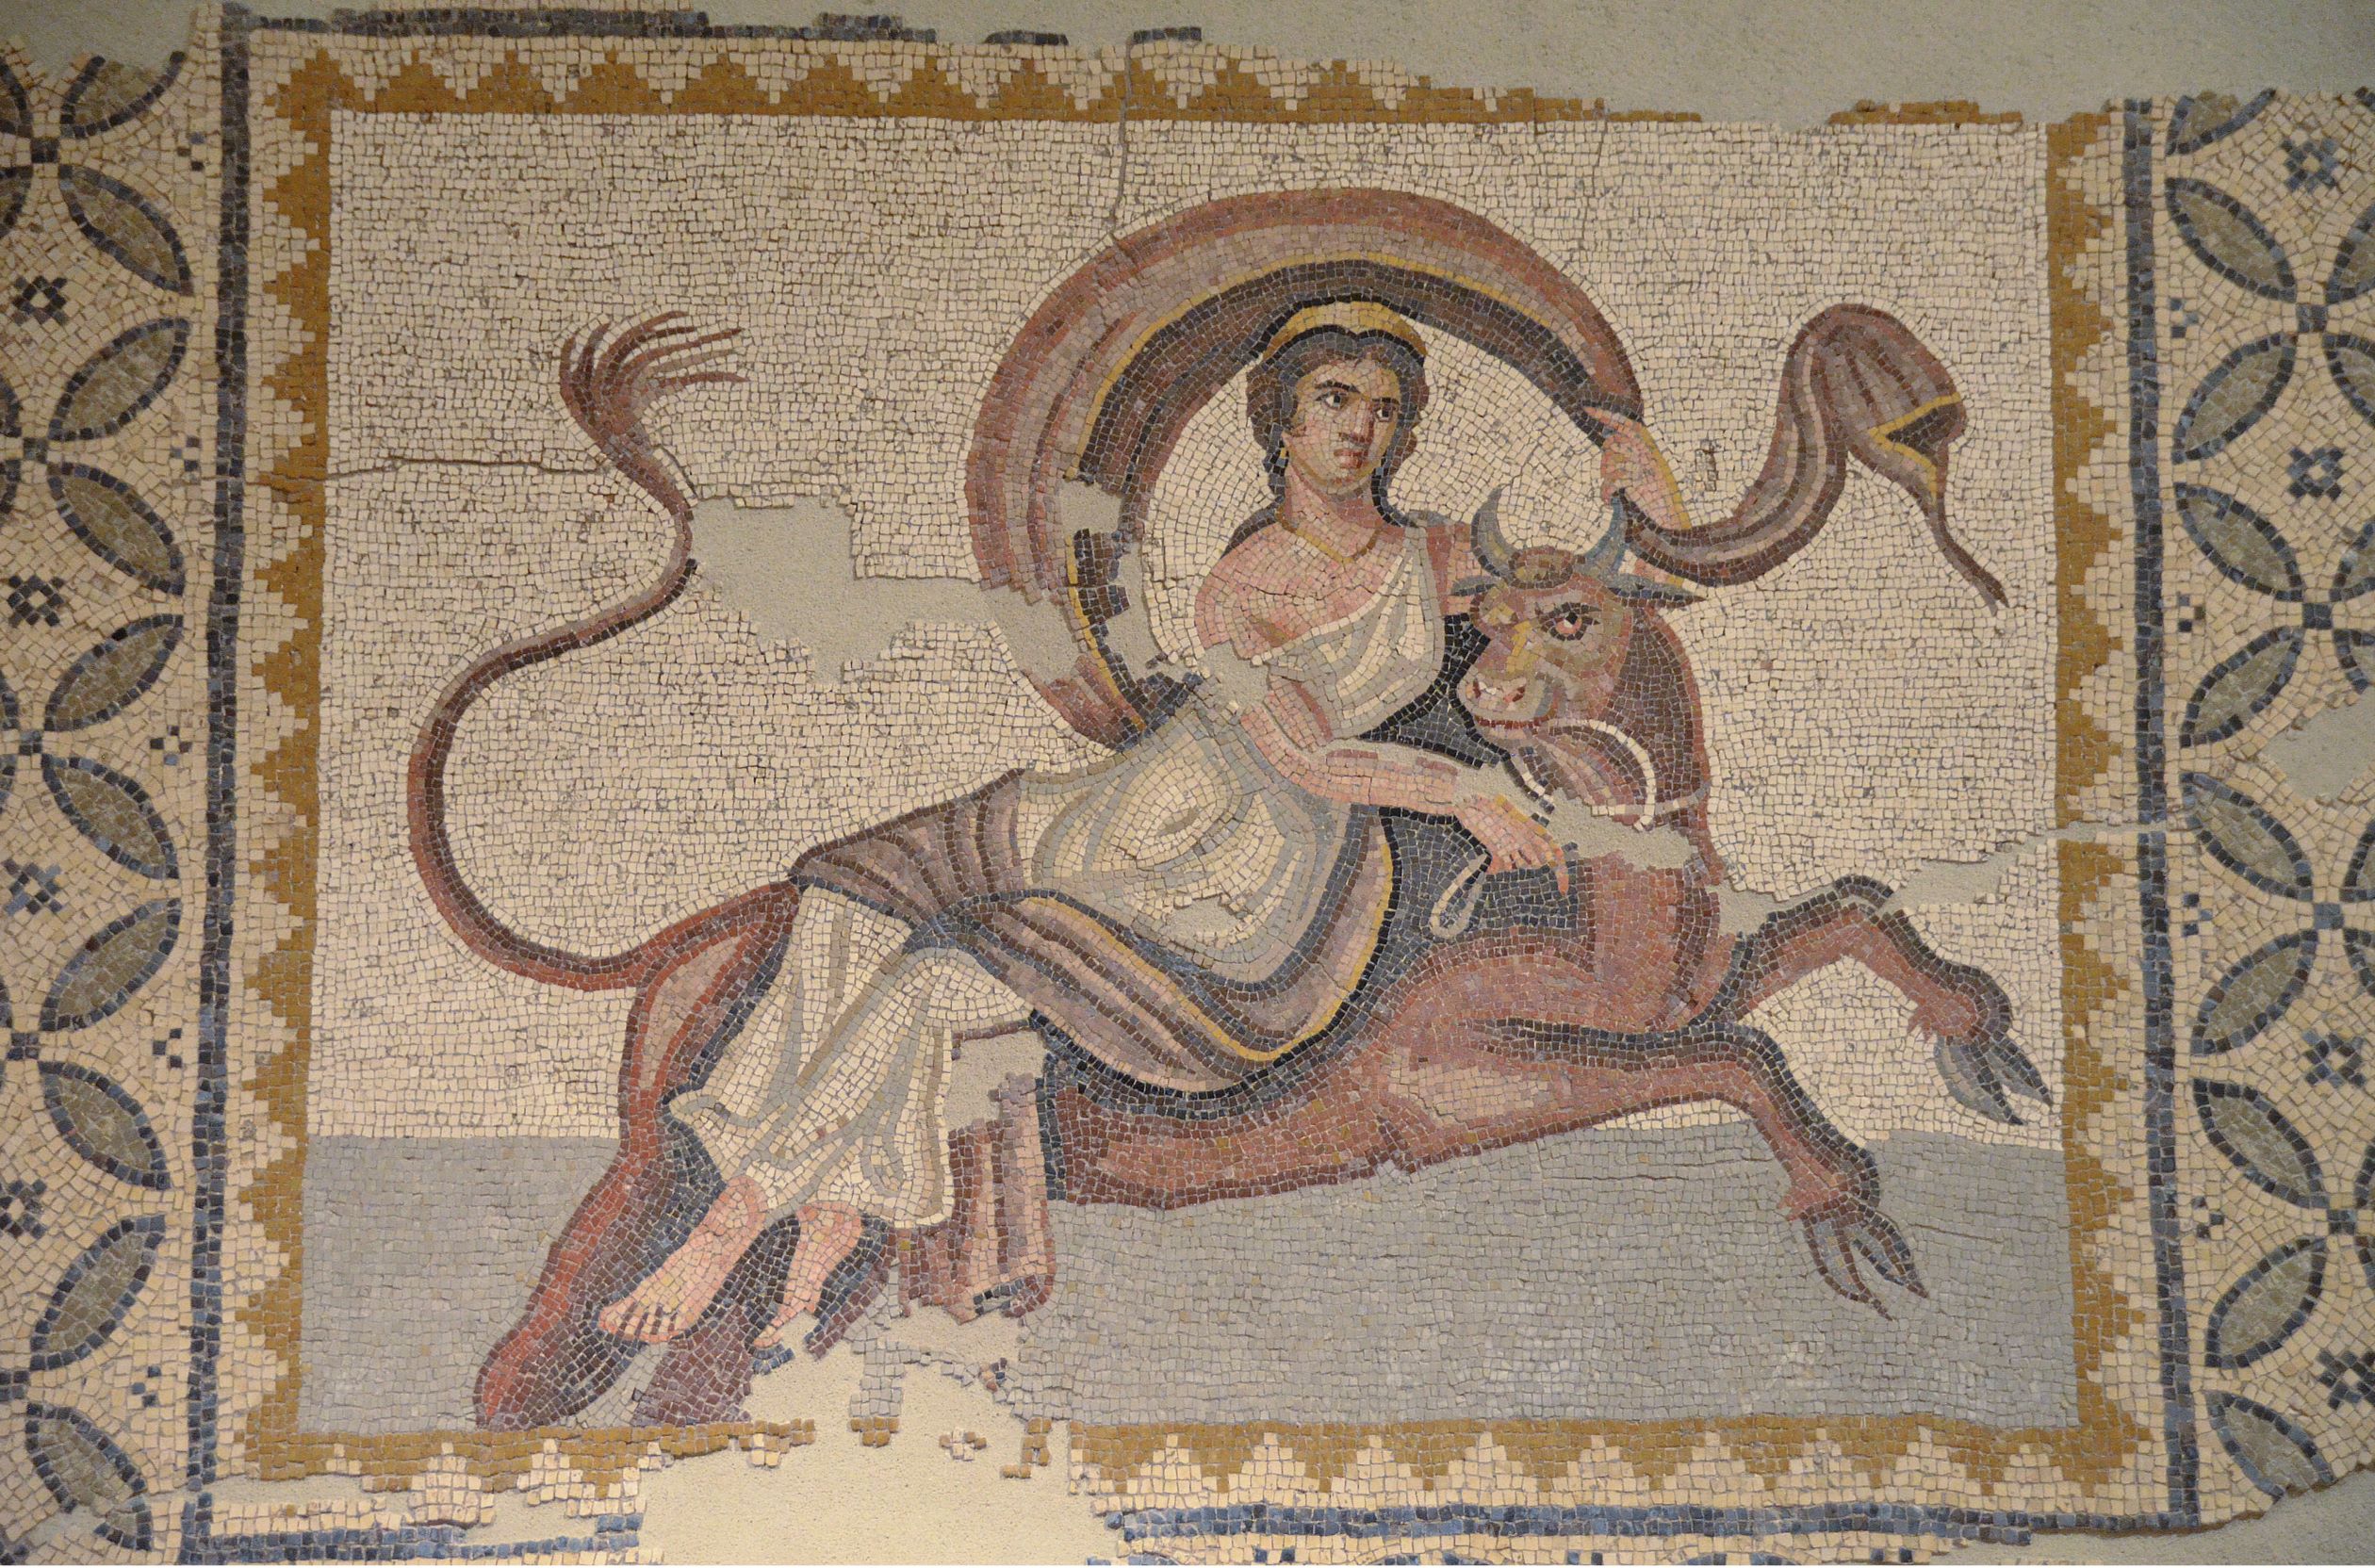 Europa and Zeus in the form of bull